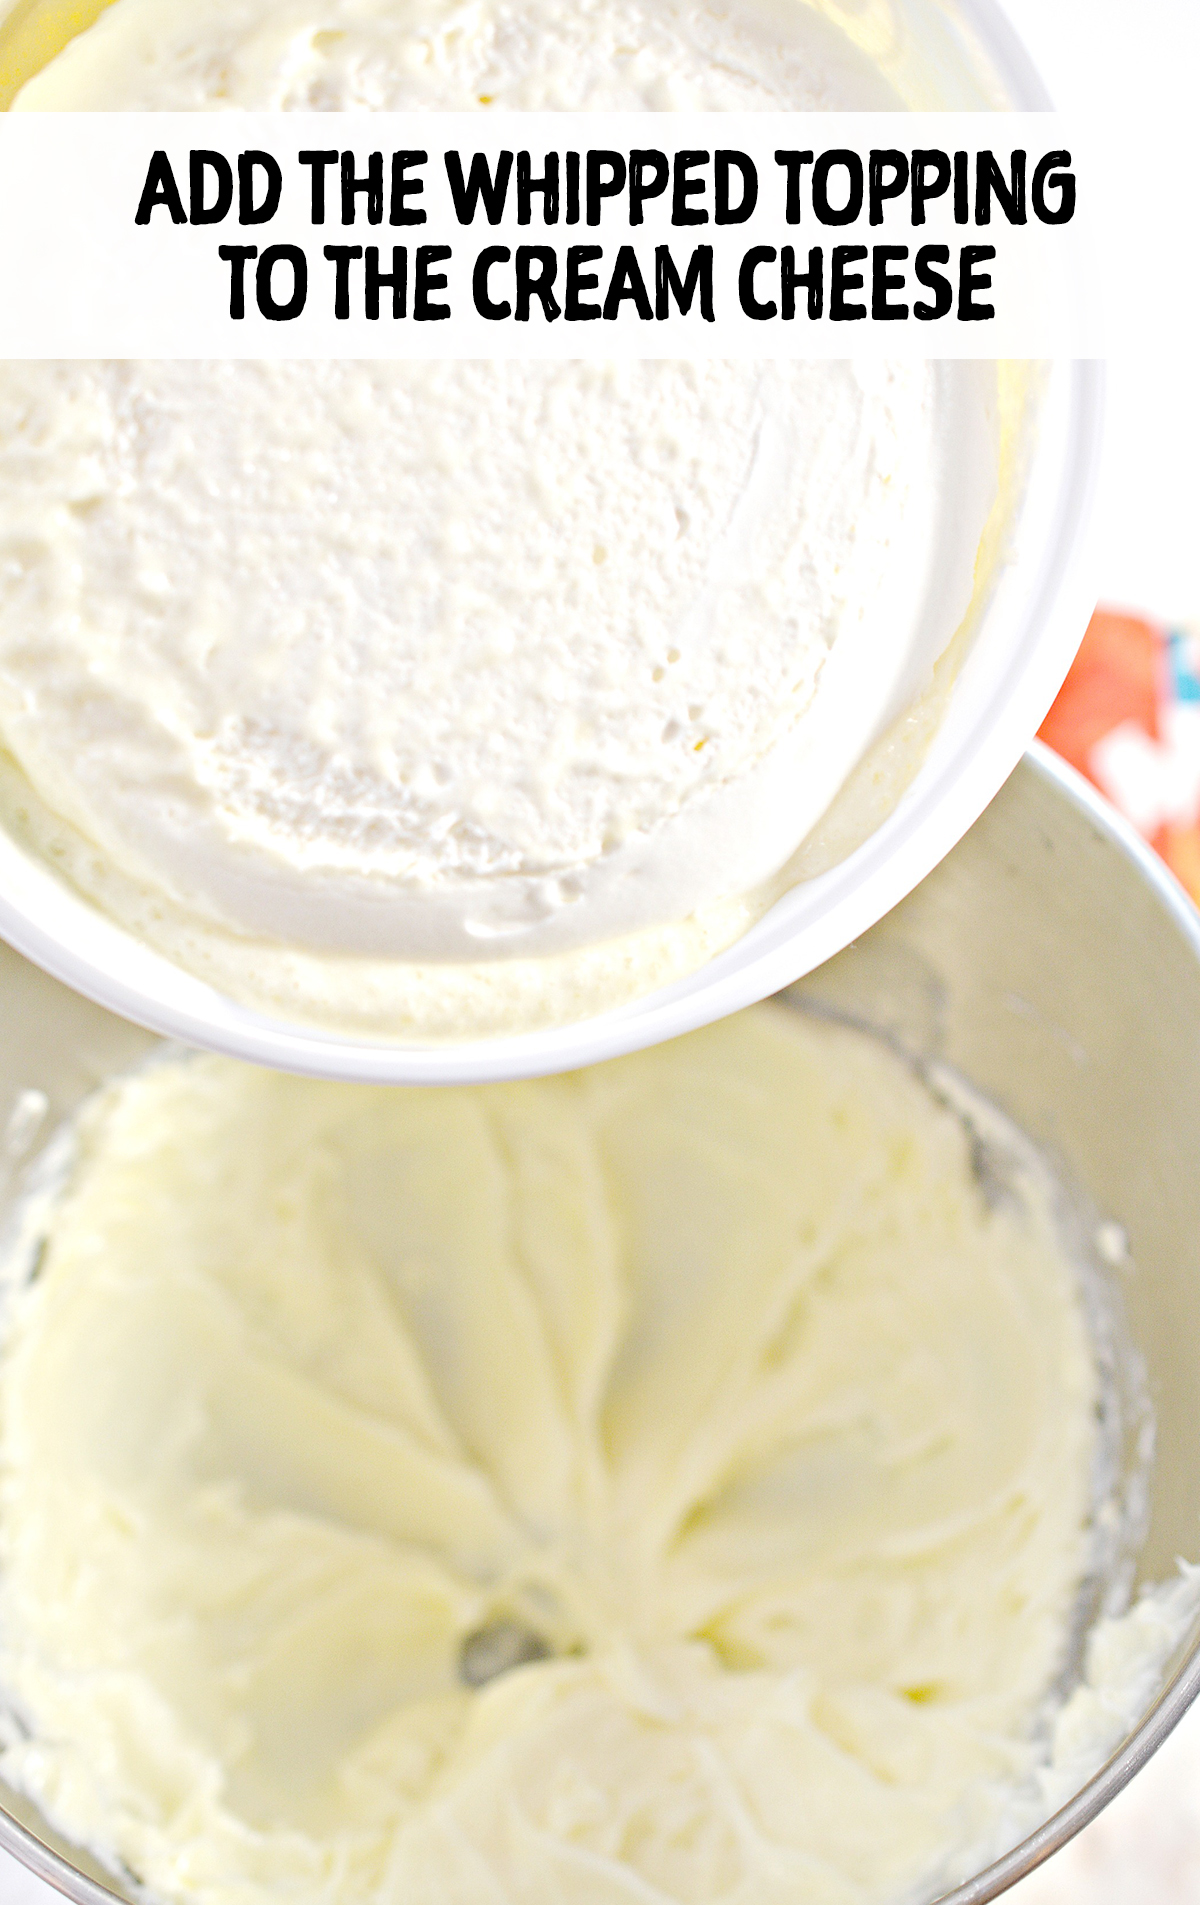 Add the whipped topping to the cream cheese